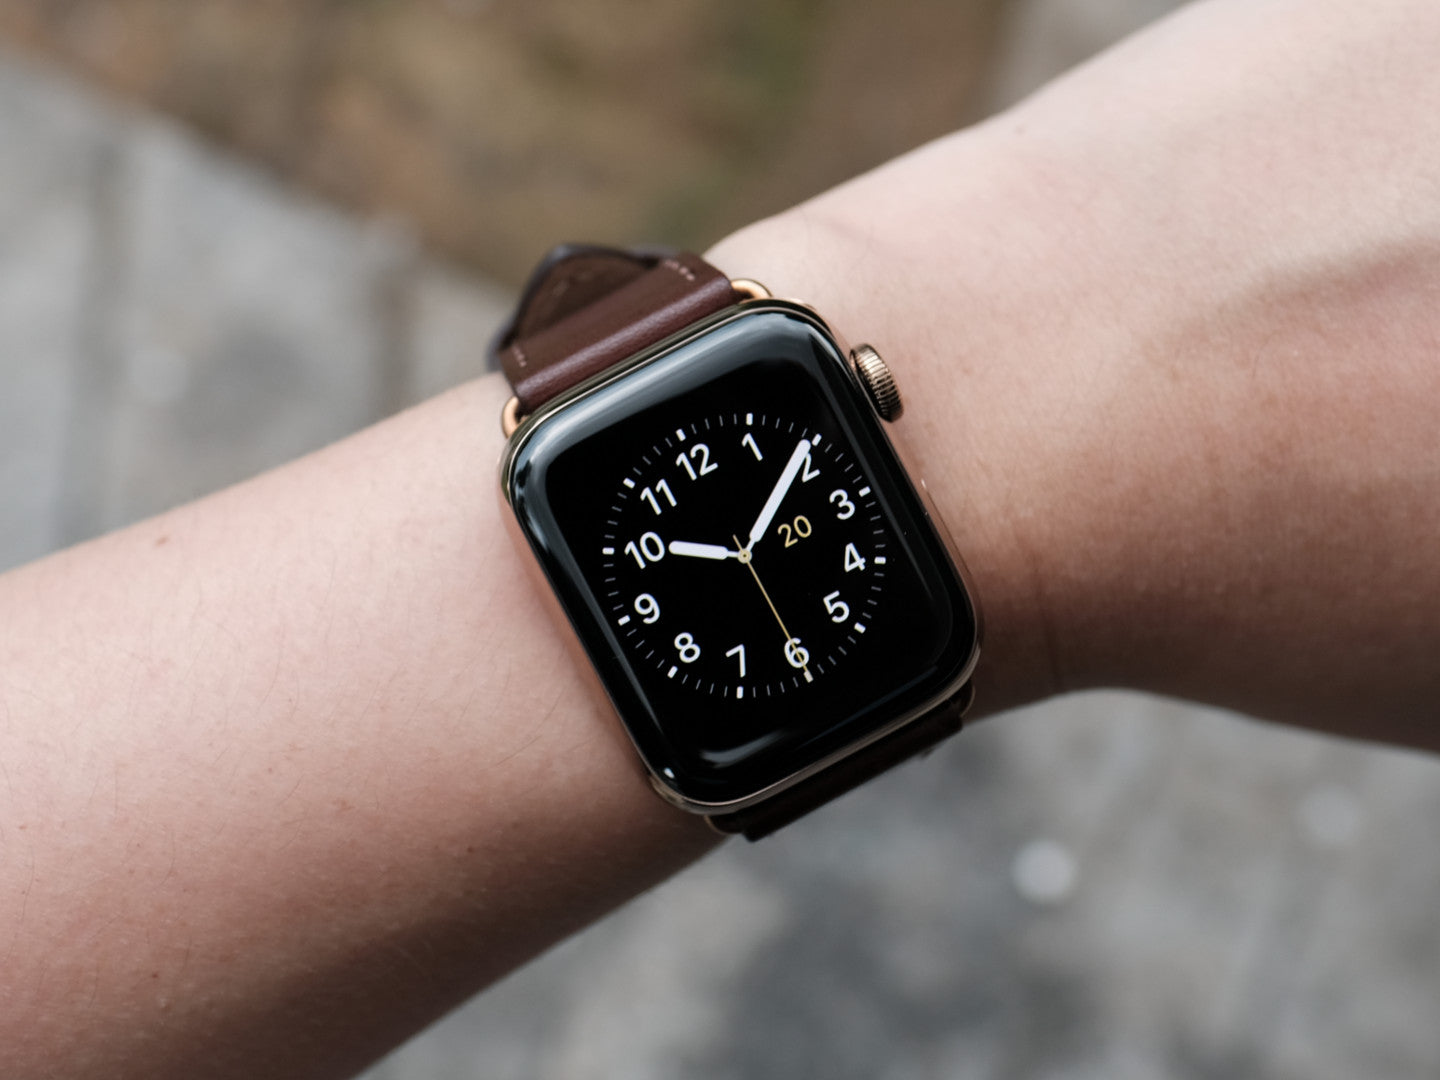 Pin and Buckle Apple Watch Straps - Full Grain Vegetable Tanned Leather - Luxe - Mocha Brown - Watch Face - Utility - Canary Yellow